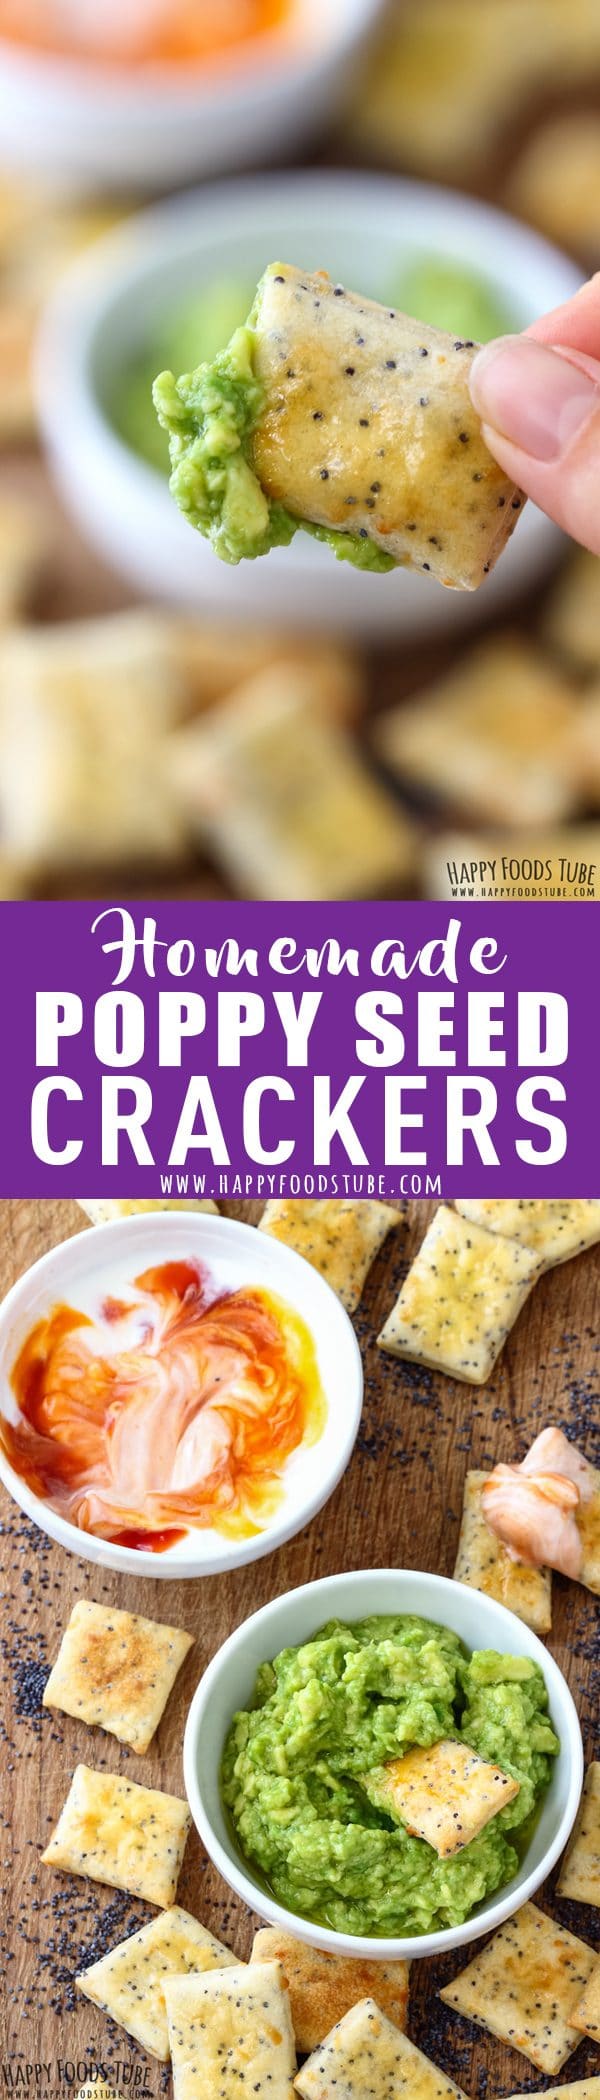 Homemade Poppy Seed Crackers Recipe Picture